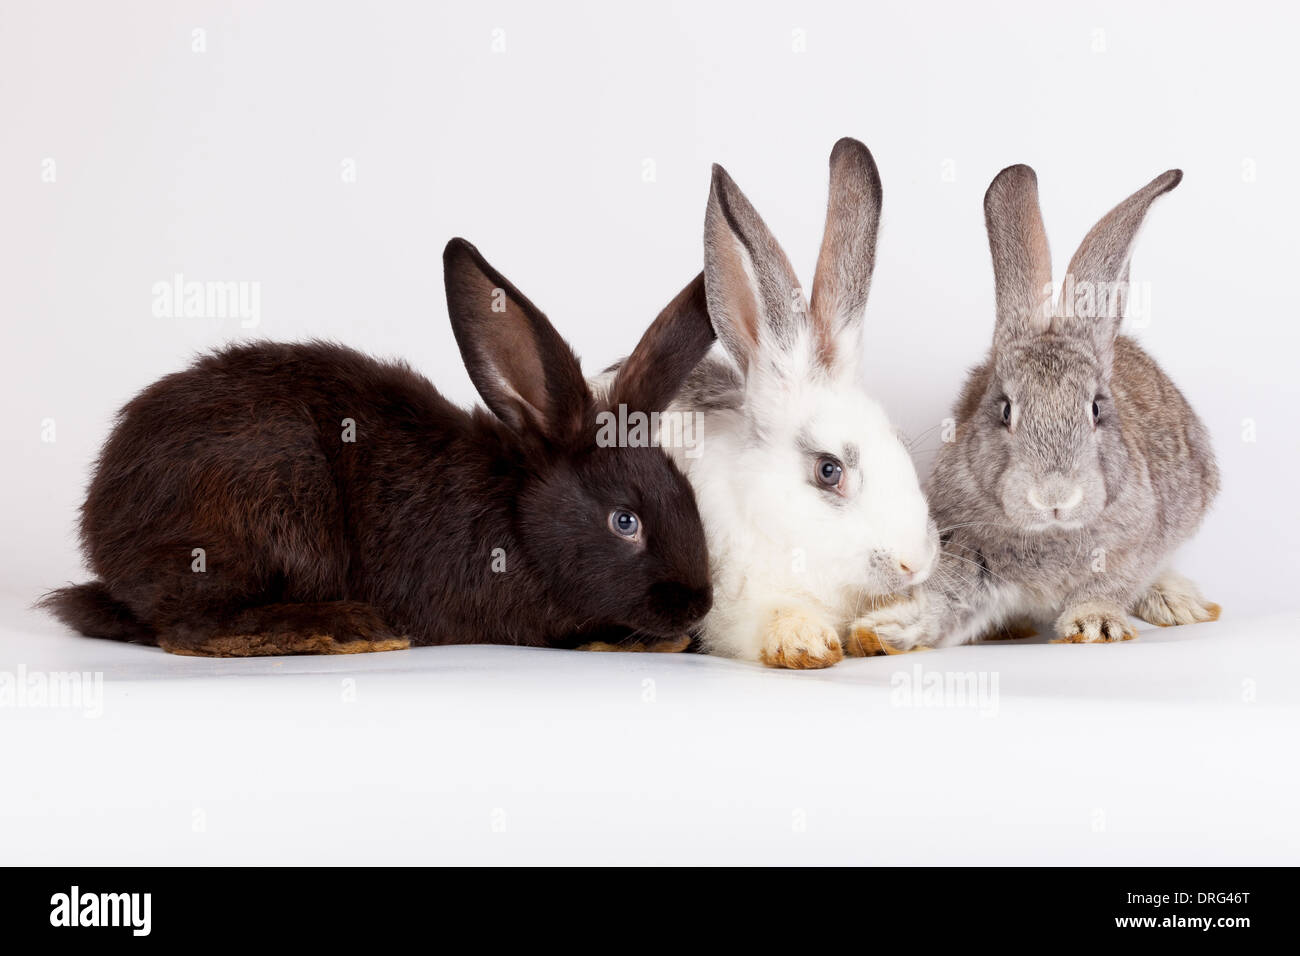 Domestic rabbit it is isolated in studio on a white background. Stock Photo